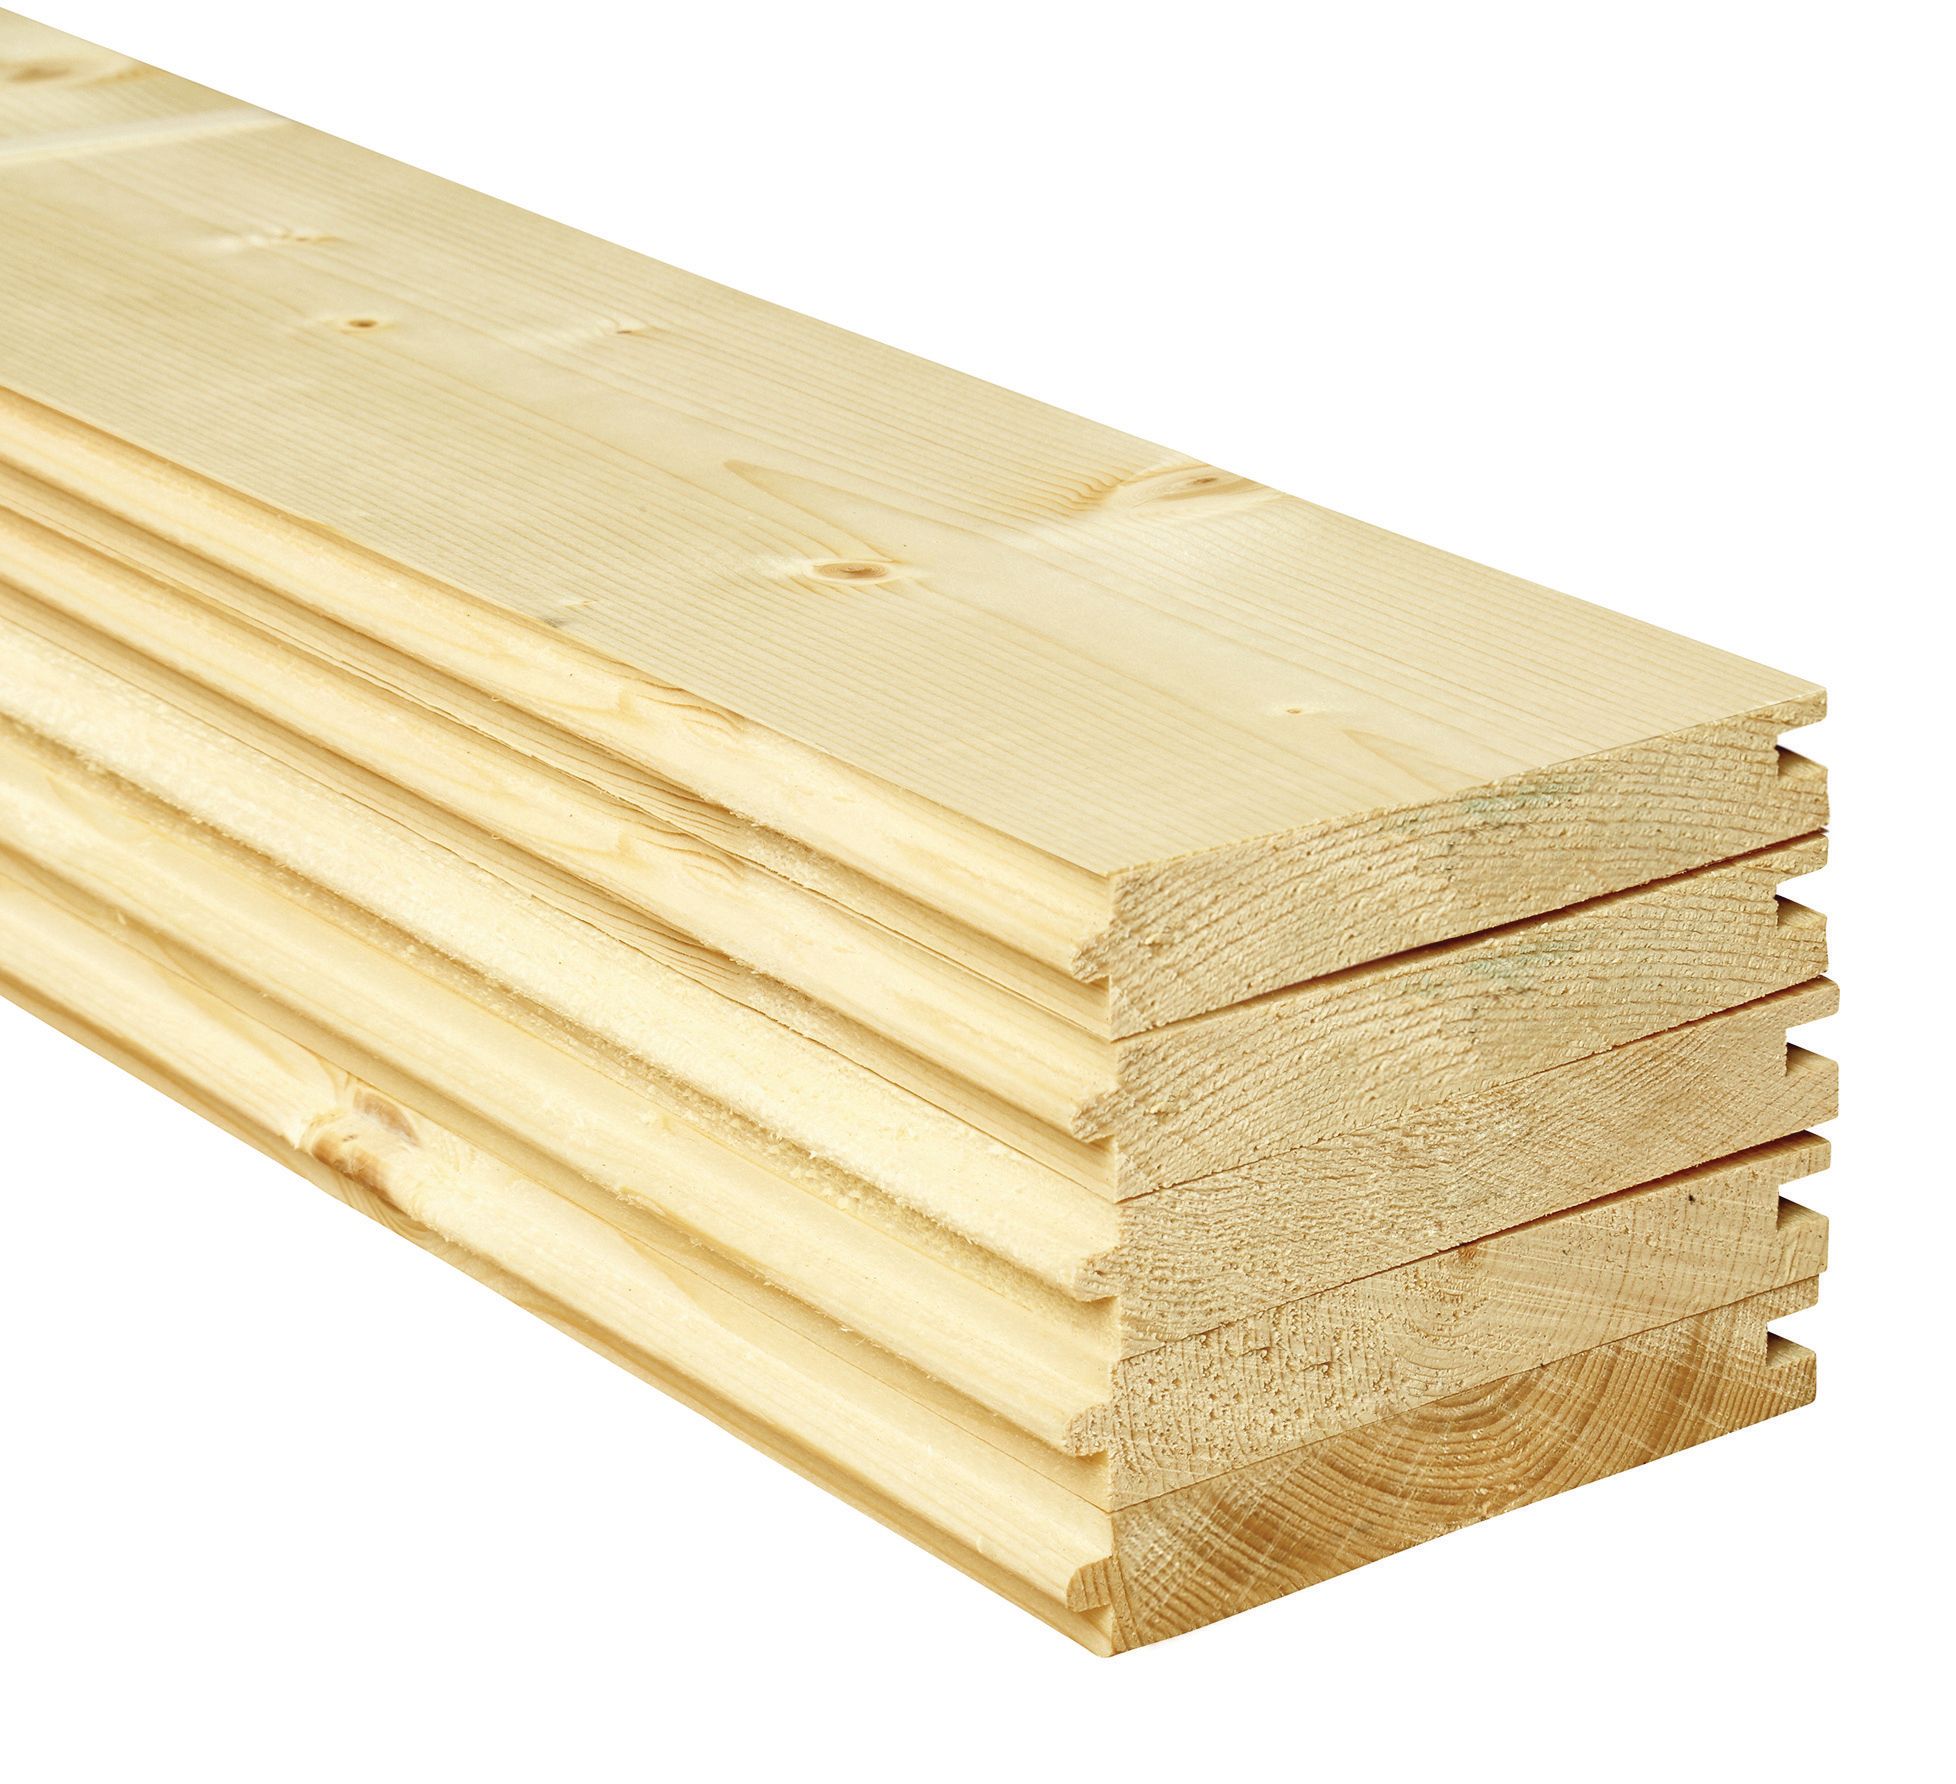 Wickes PTG Timber Floorboards - 21mm x 137mm x 3000mm - Pack of 5